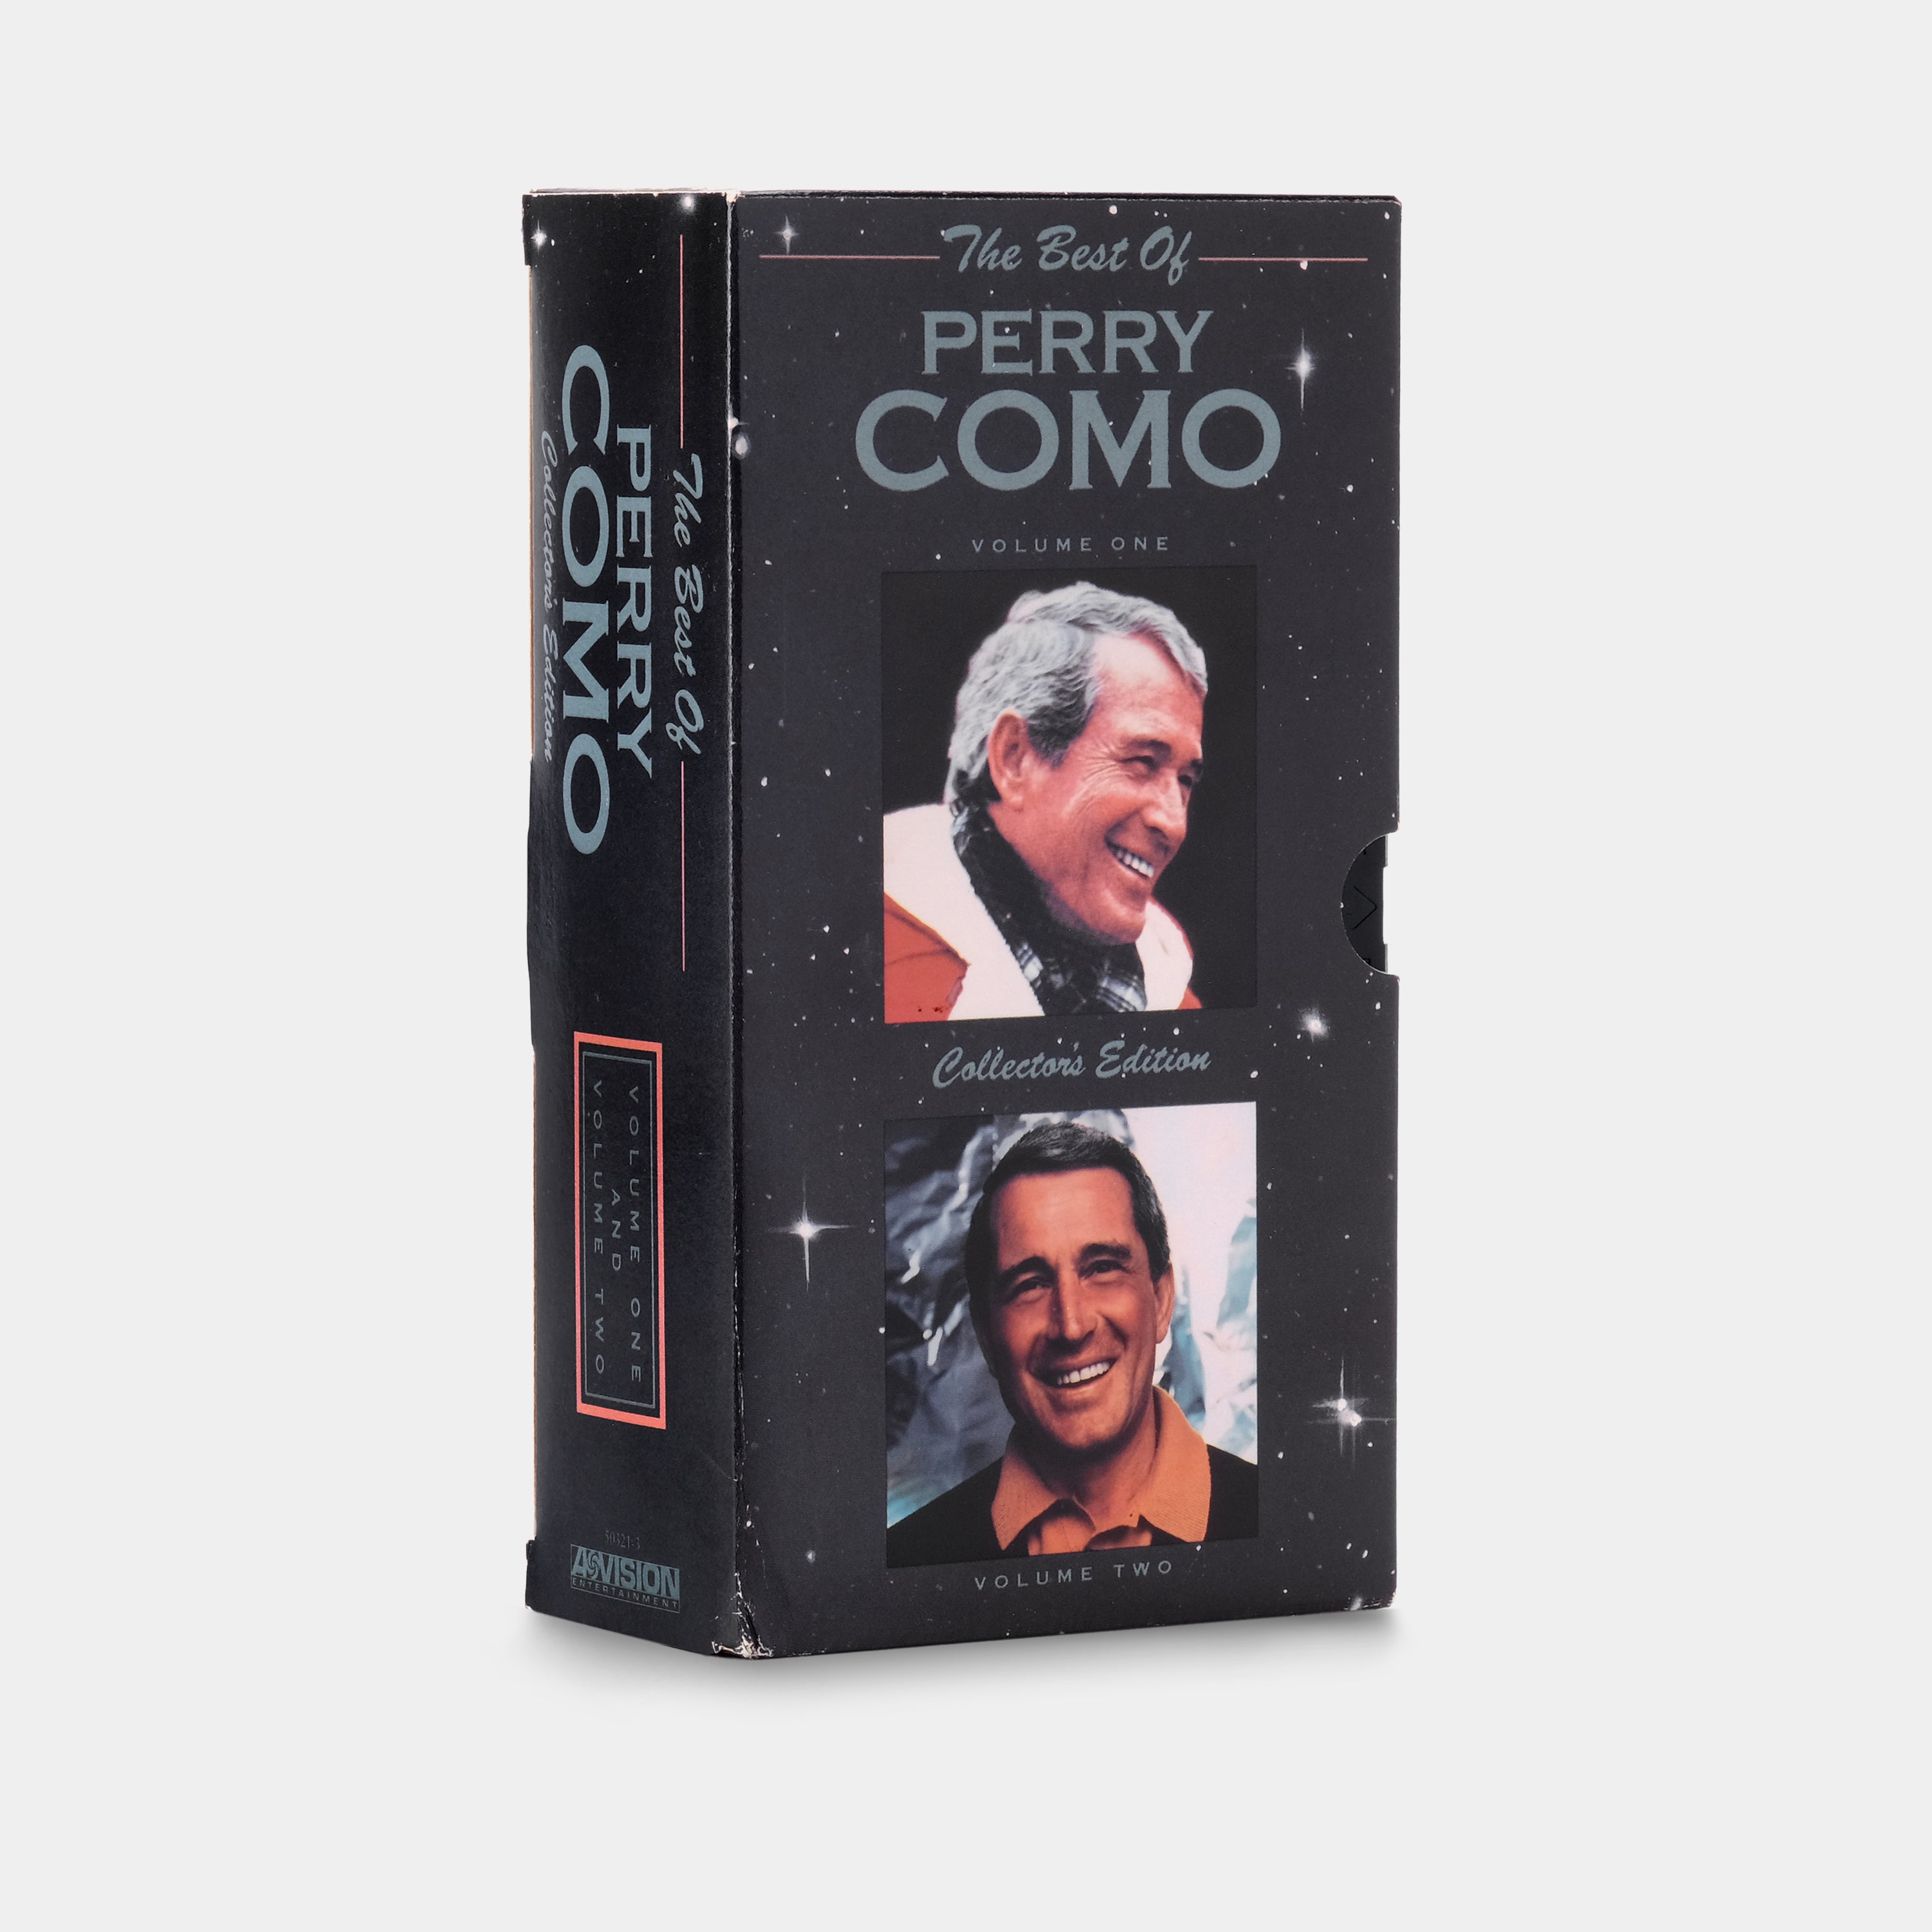 The Best Of Perry Como (Collector's Edition) VHS Tape Set